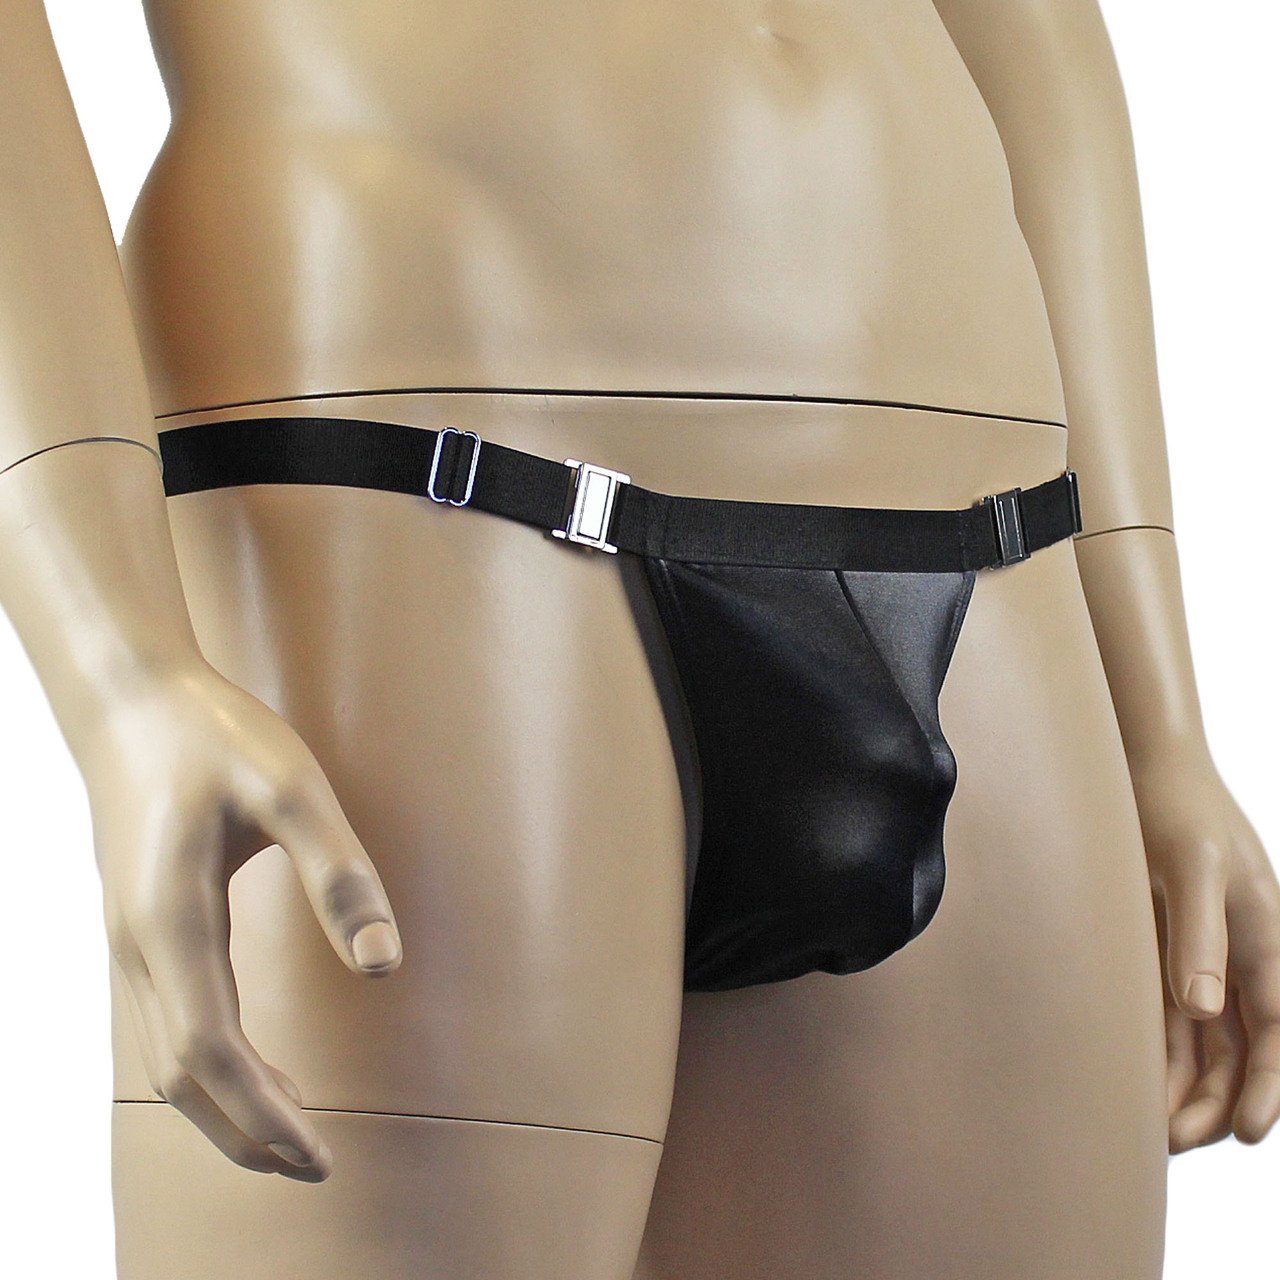 Male Oil Wetlook Thong with Clasp Open Sides with Adjustable Strap Black